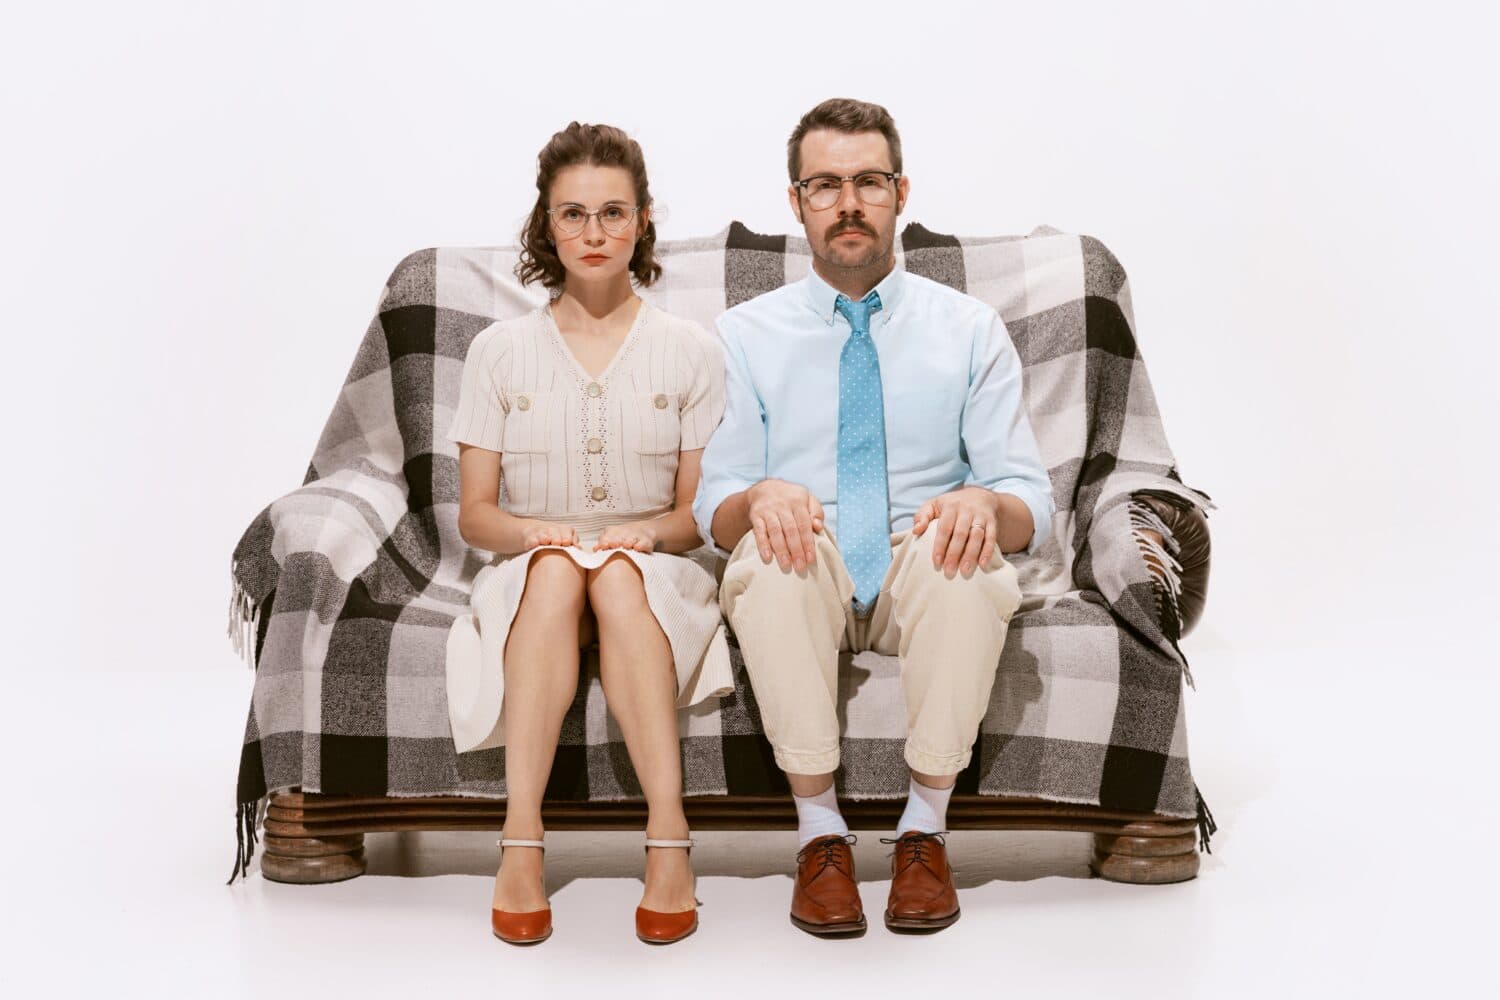 Portrait of serious man and woman sitting on sofa and looking at camera isolated over white background. Concept of love, relationship, retro style, creativity, family. Copy space for ad